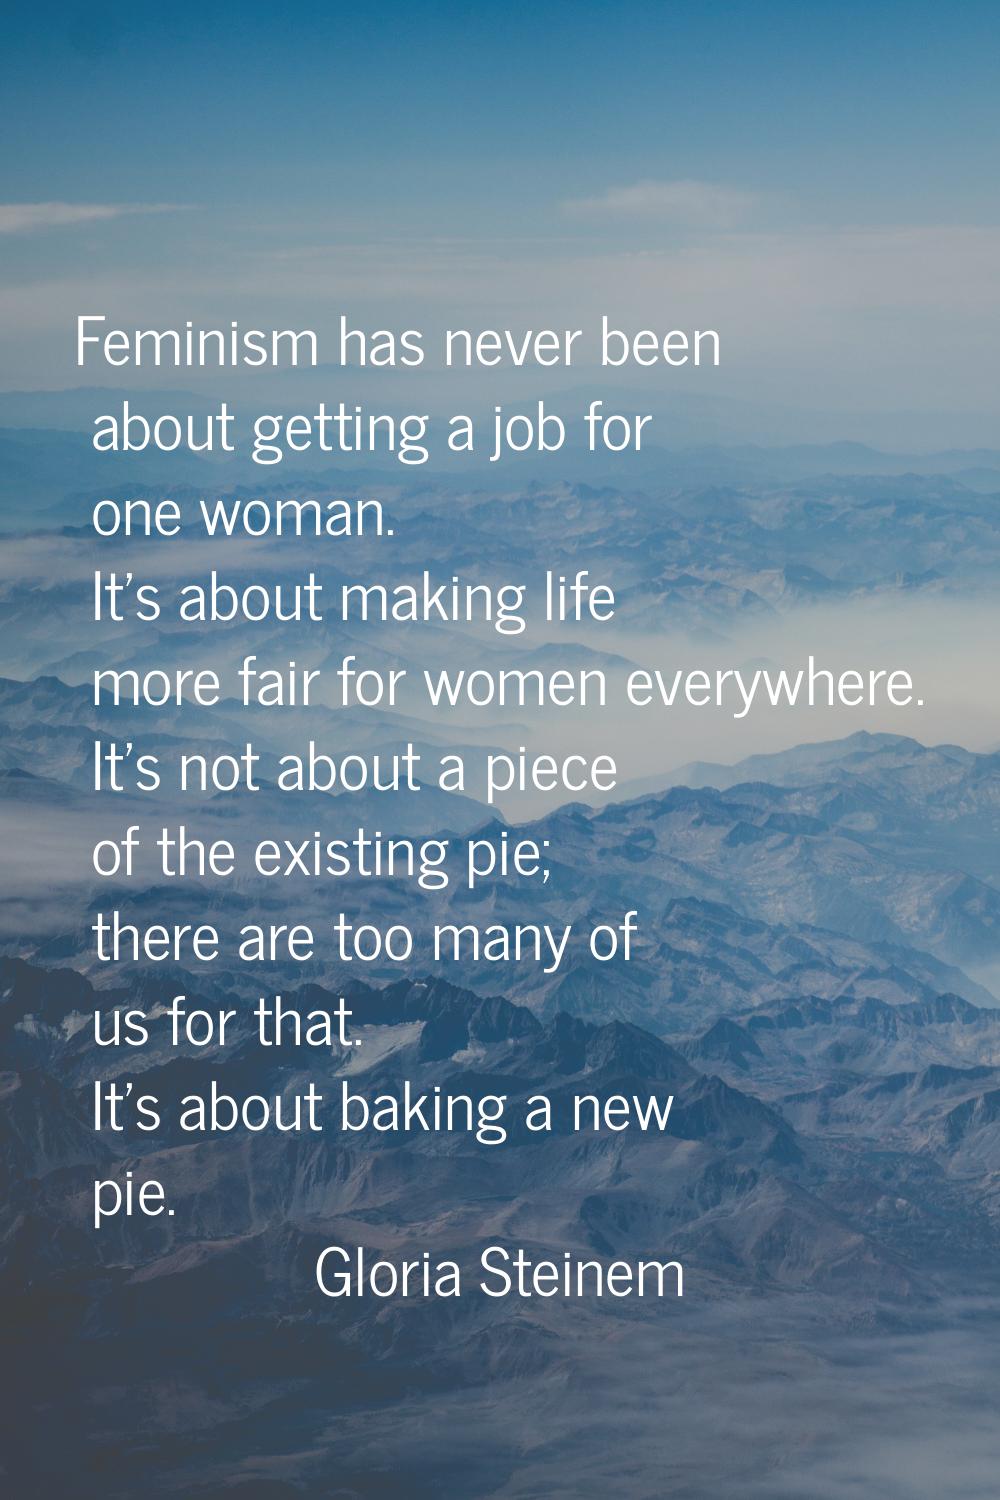 Feminism has never been about getting a job for one woman. It's about making life more fair for wom